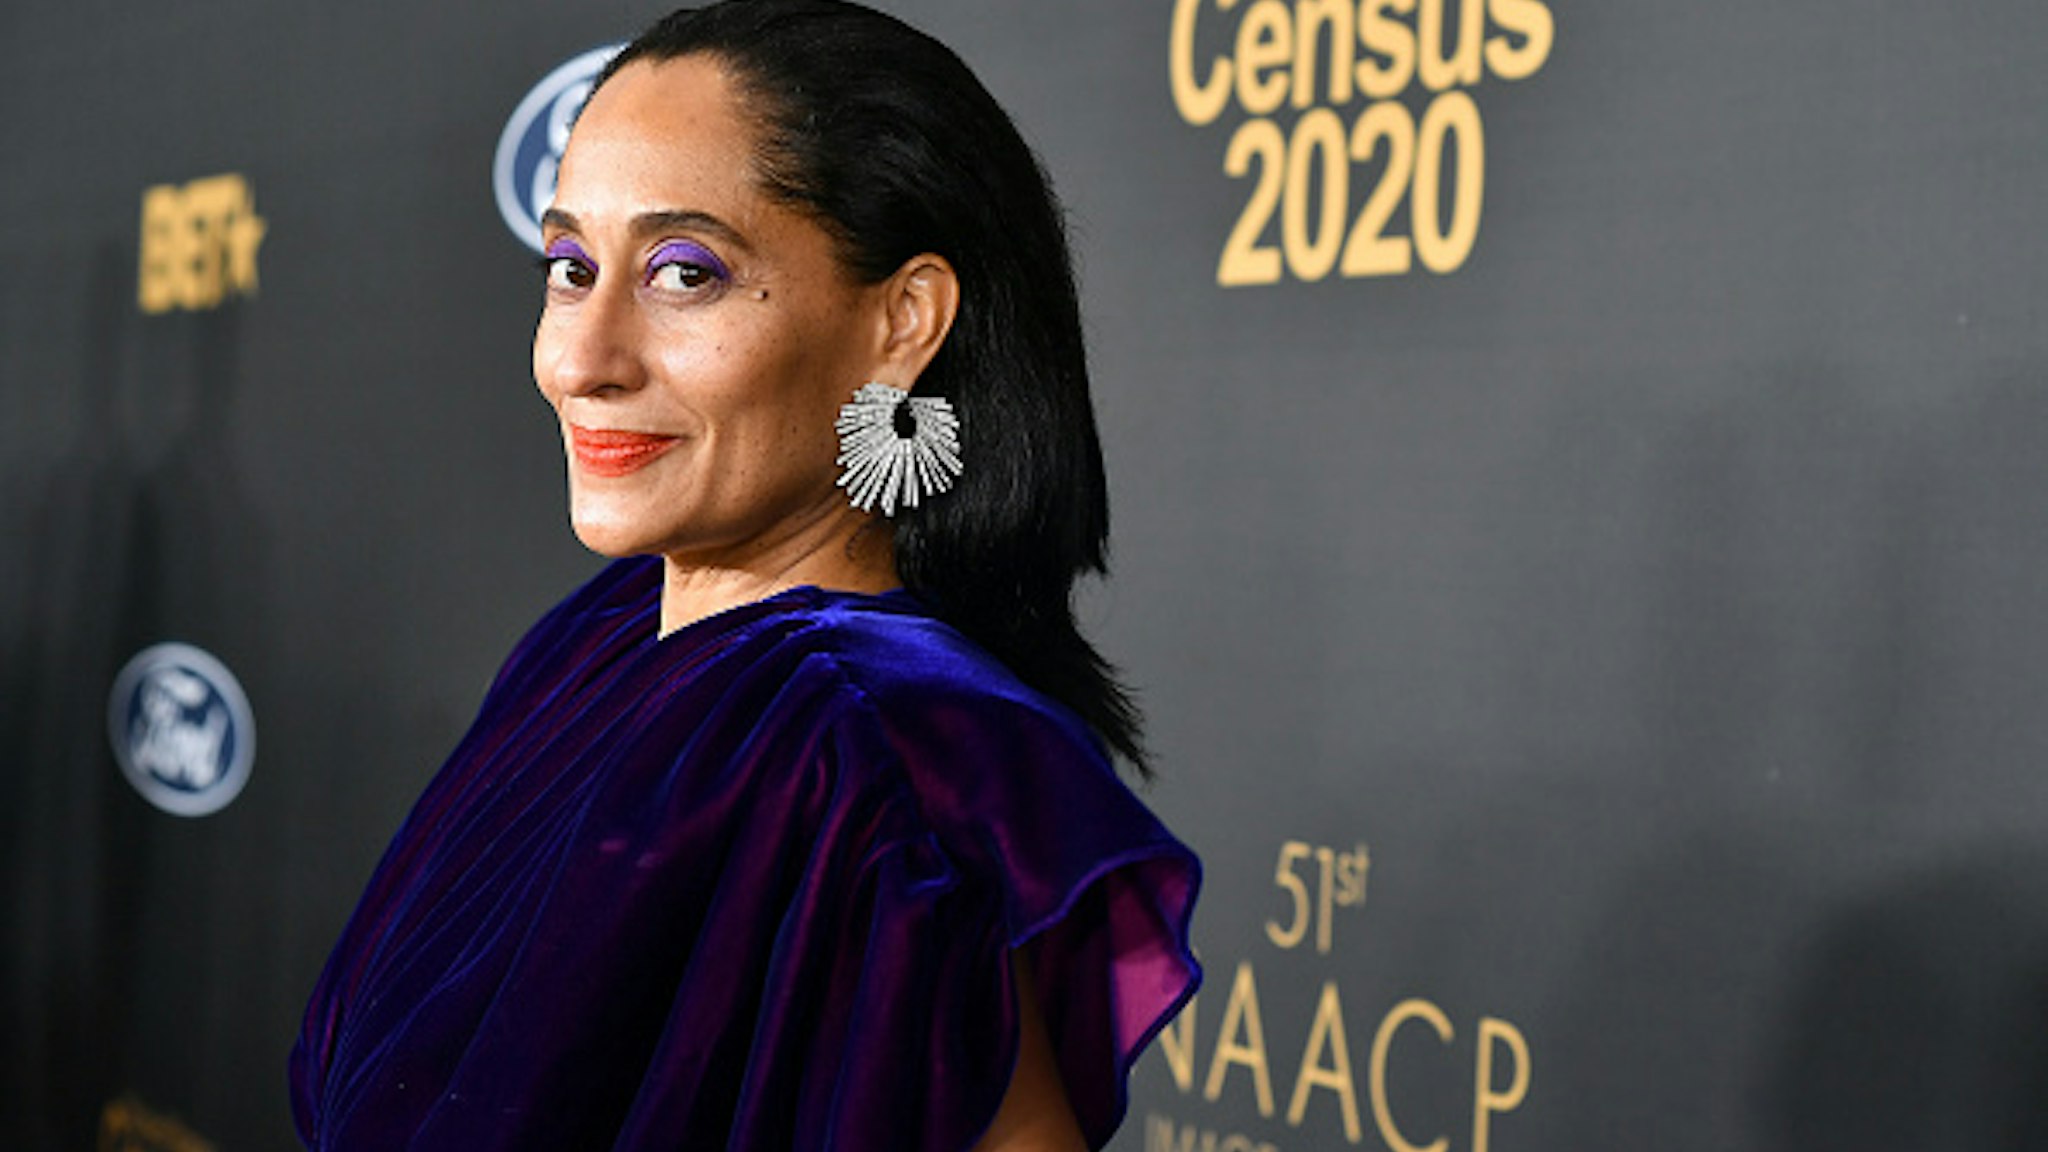 PASADENA, CALIFORNIA - FEBRUARY 22: Tracee Ellis Ross attends the 51st NAACP Image Awards, Presented by BET, at Pasadena Civic Auditorium on February 22, 2020 in Pasadena, California.